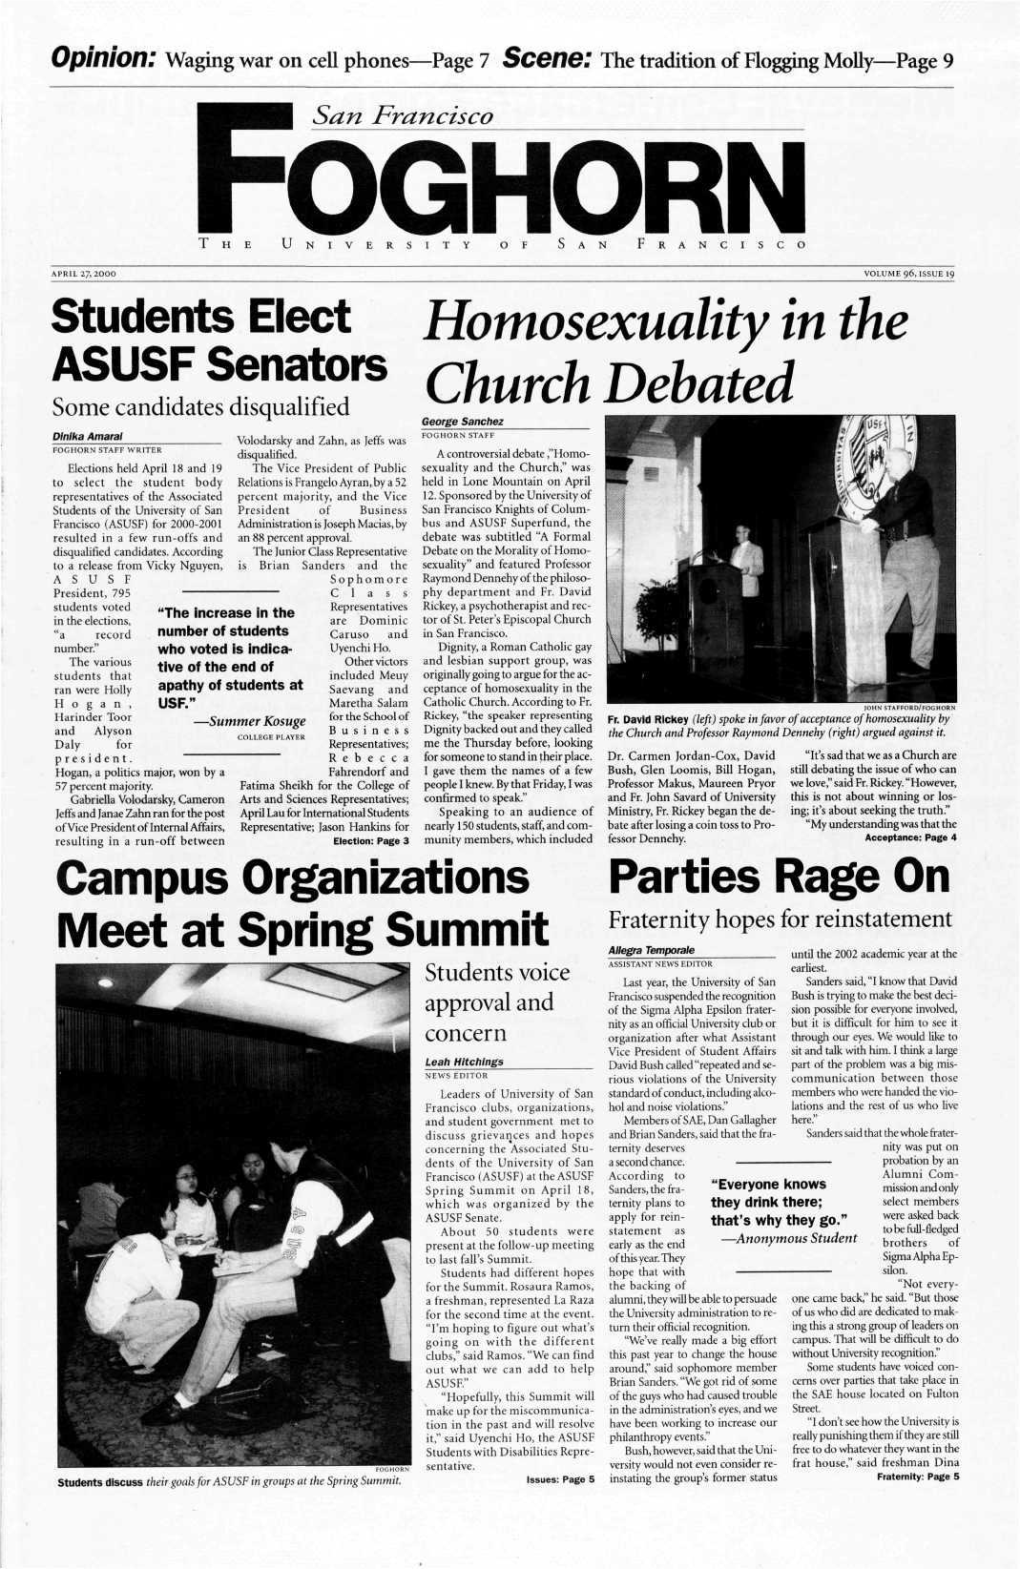 Students Elect ASUSF Senators Homosexuality in the Church Debated